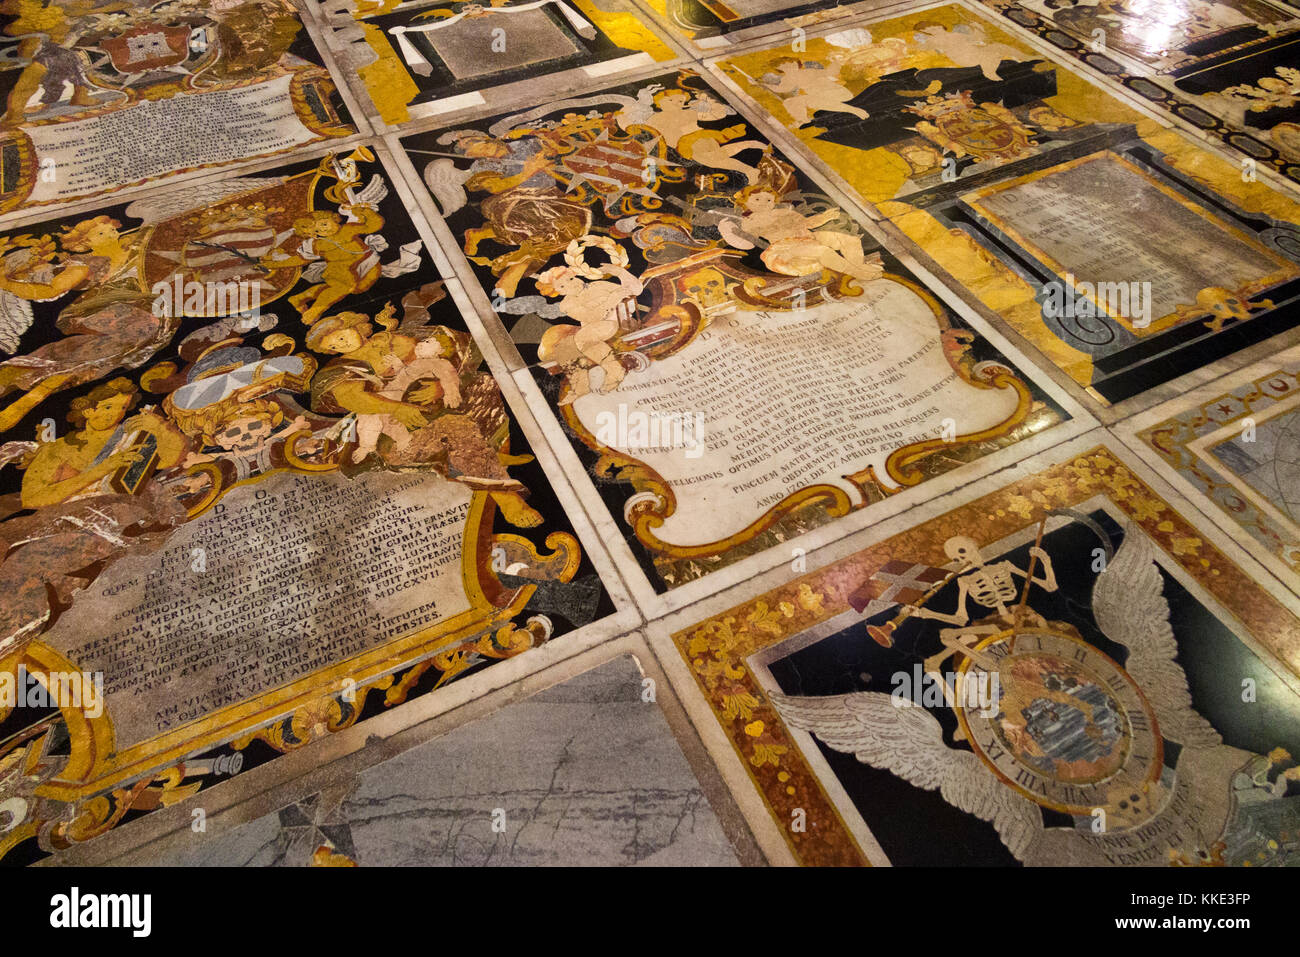 Floor of the nave comprising of many inlaid tombstone / tombstones / marble slab / grave in the / inside St John's Co-Cathedral. Valletta, Malta. (91) Stock Photo